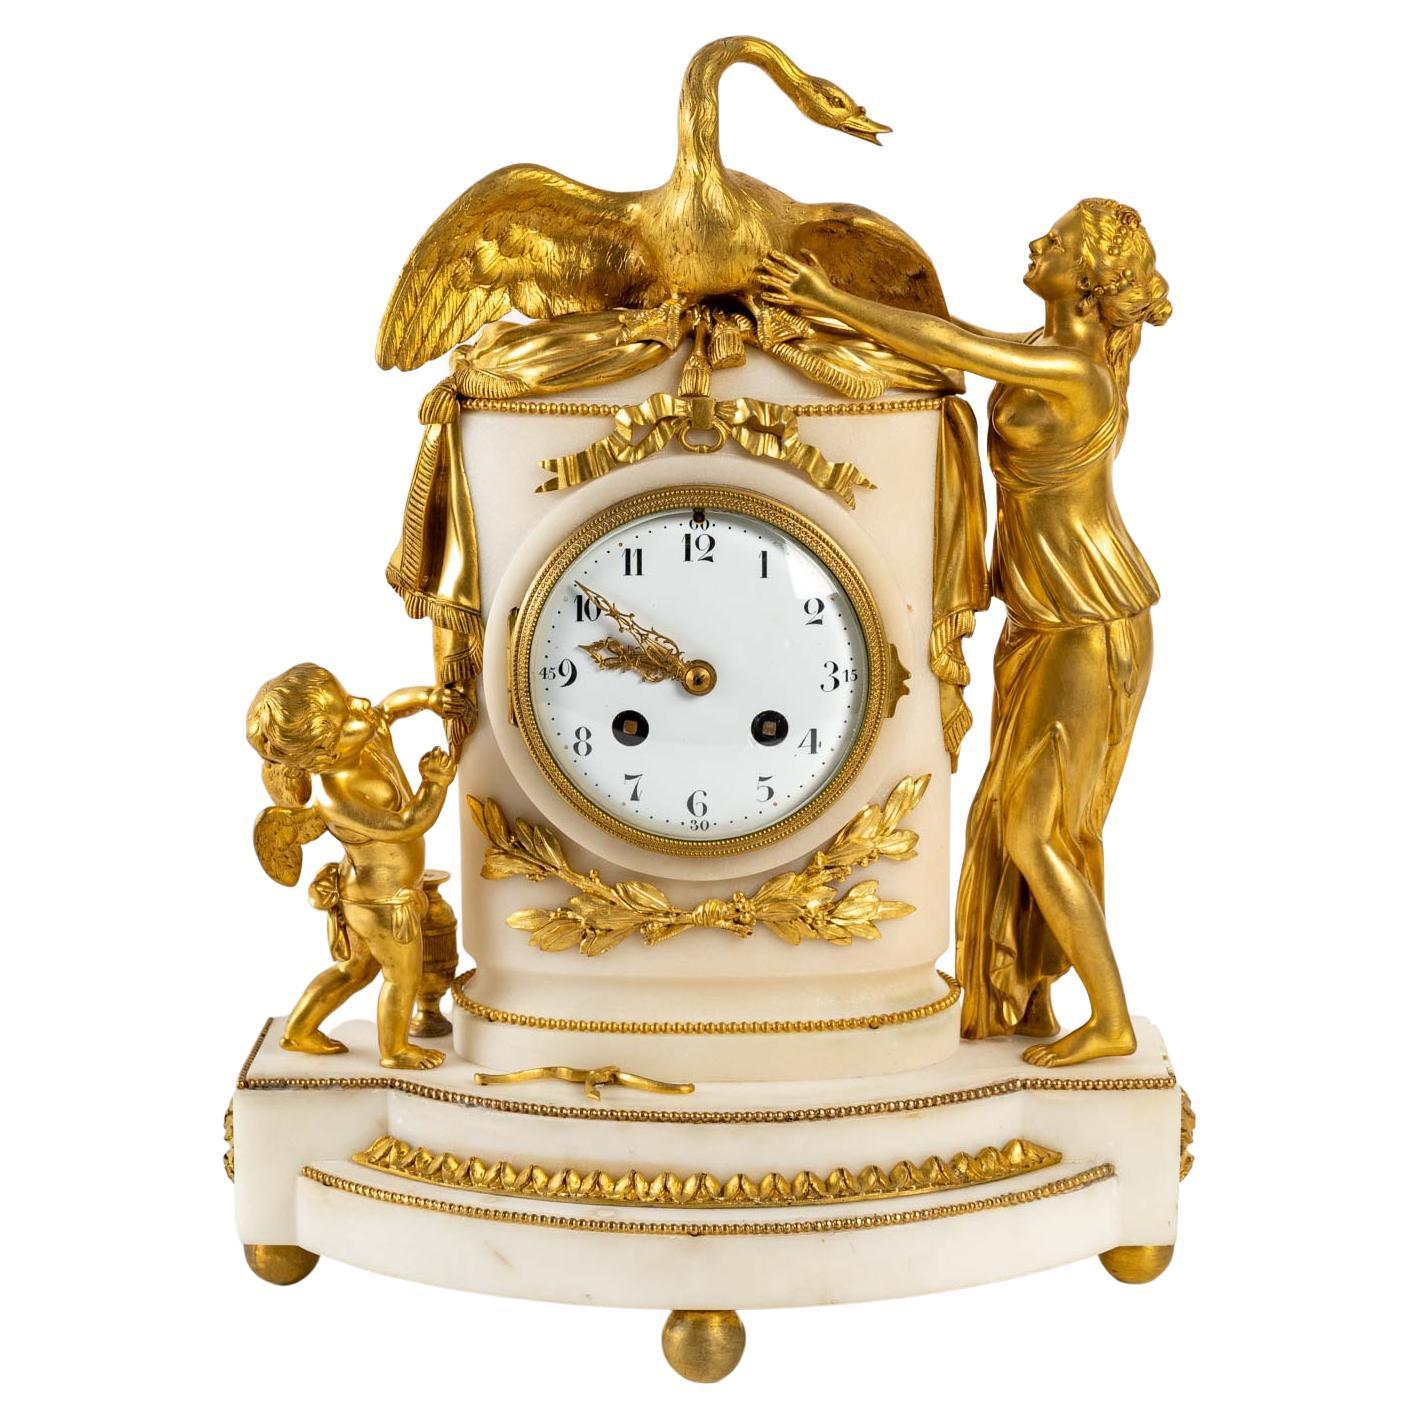 Beautiful gilt bronze and marble clock, early 19th century.